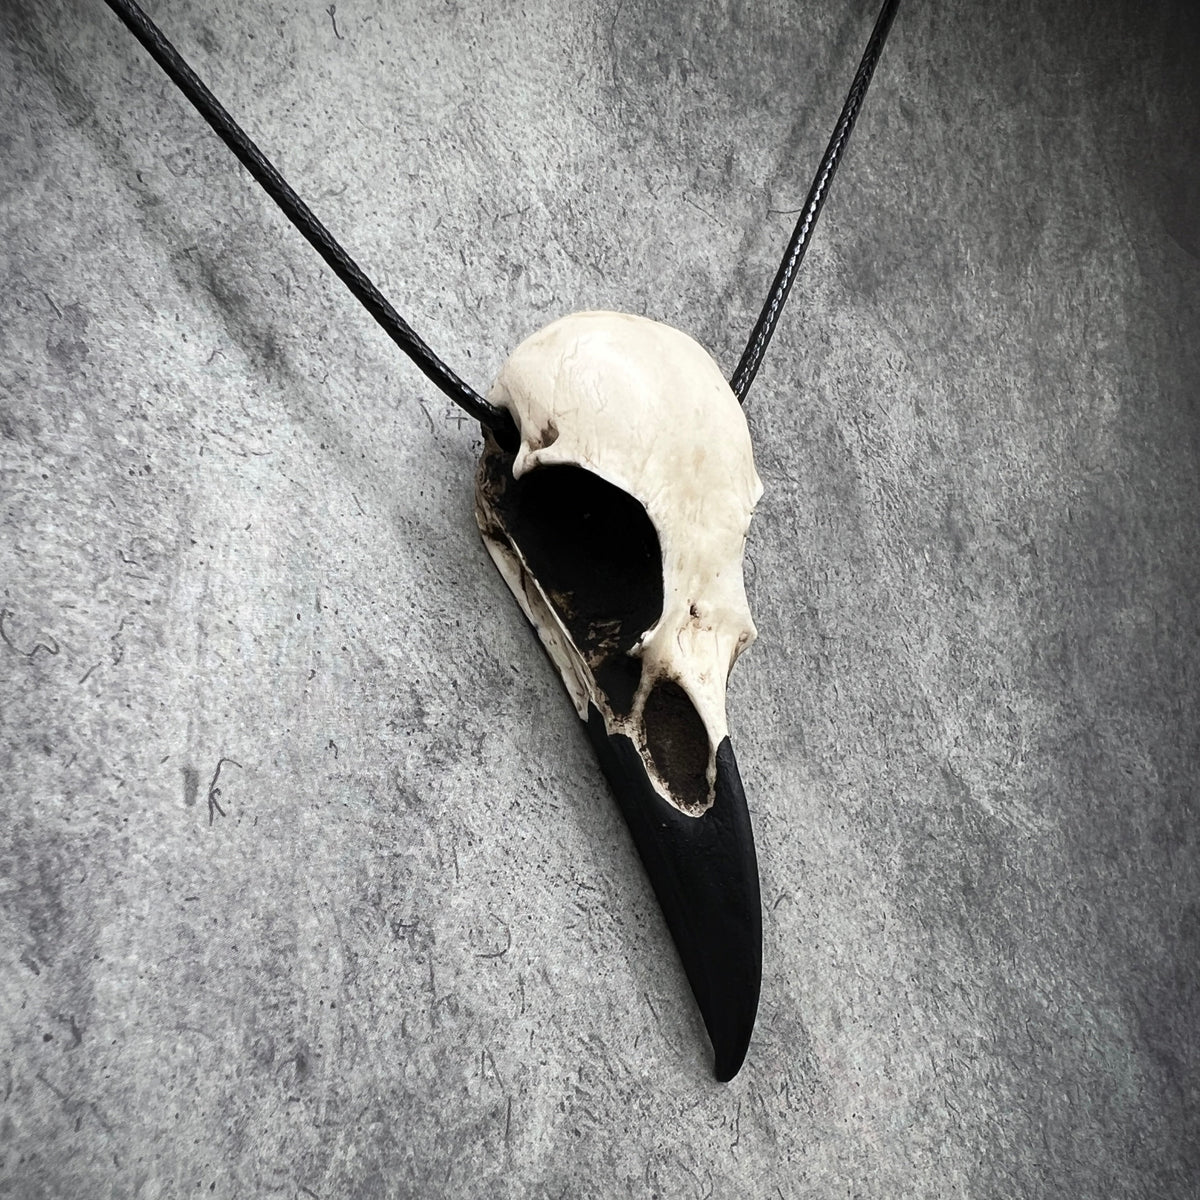 Skull festival necklace for dark creepy outfit goth style. A raven skull pendant made of resin. 